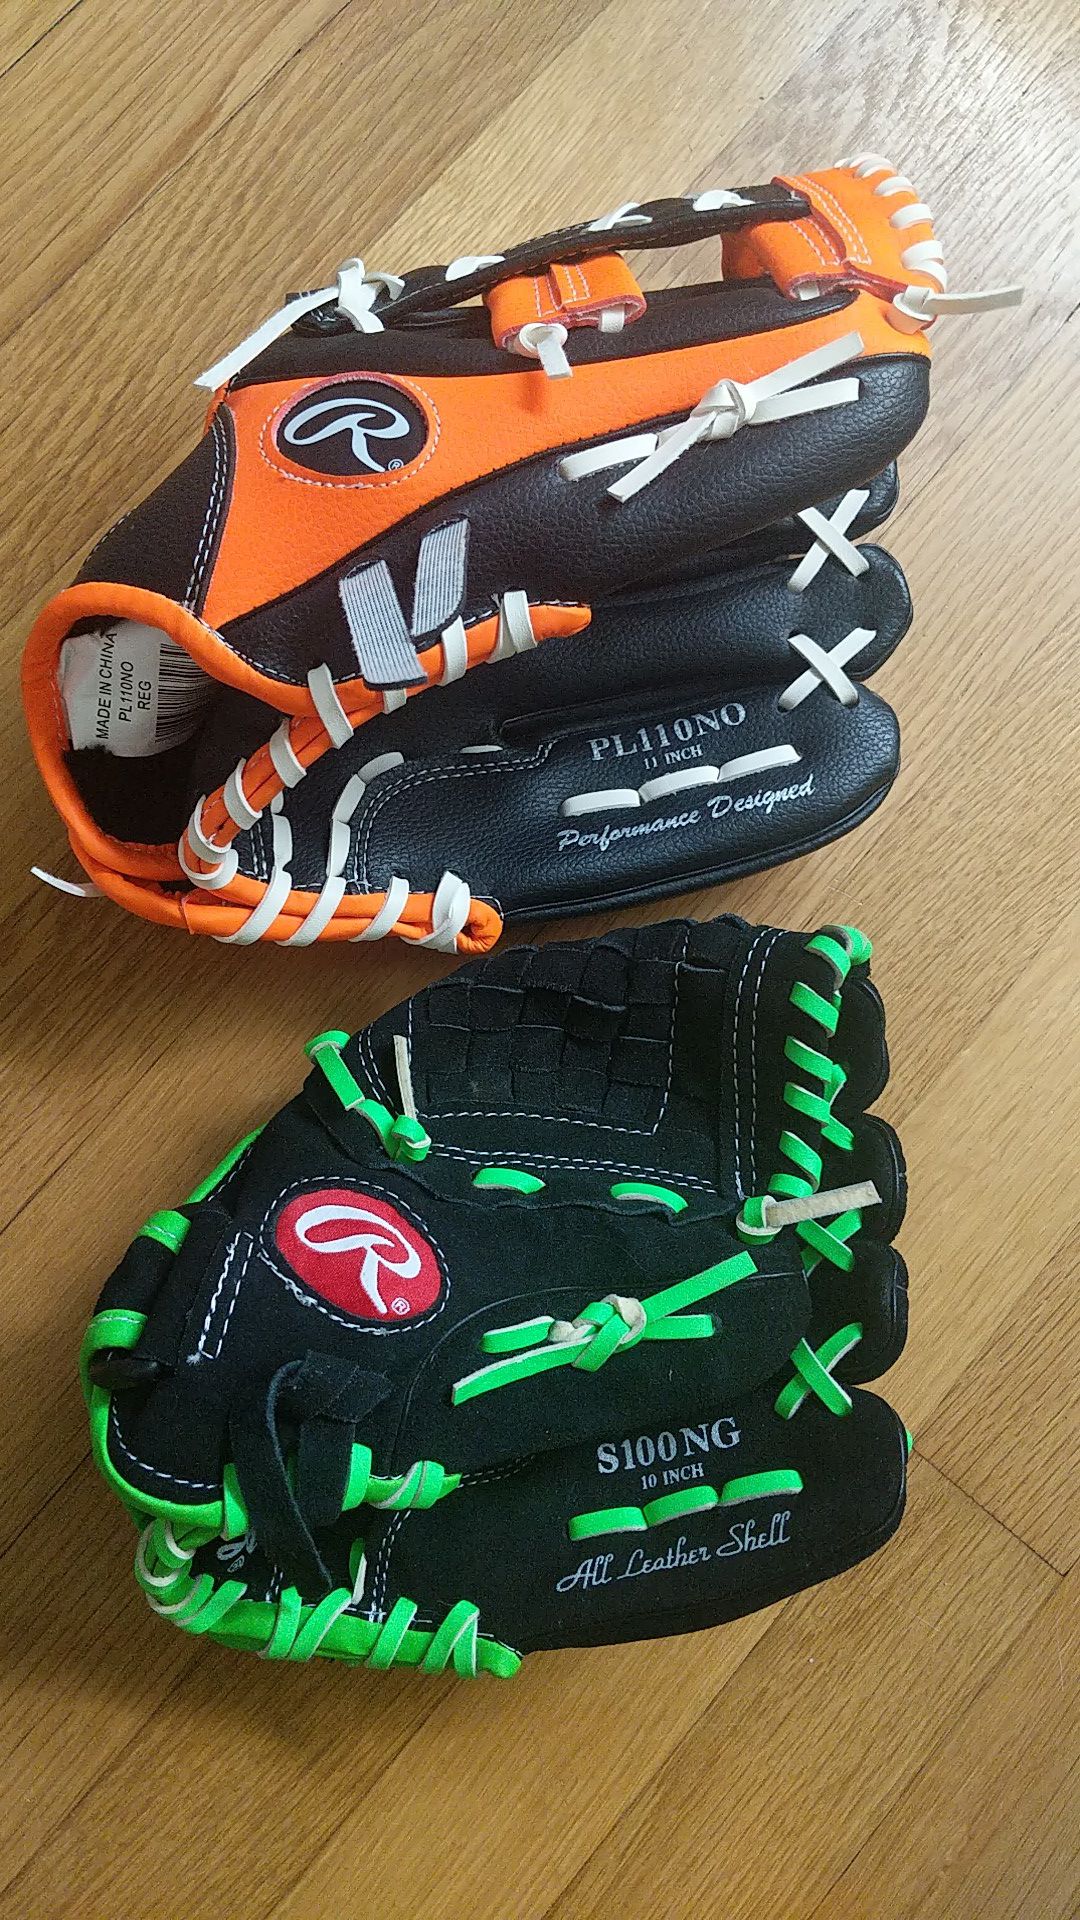 Two RAWLINGS Youth Ages 7-9 Baseball Gloves 10" and 11"